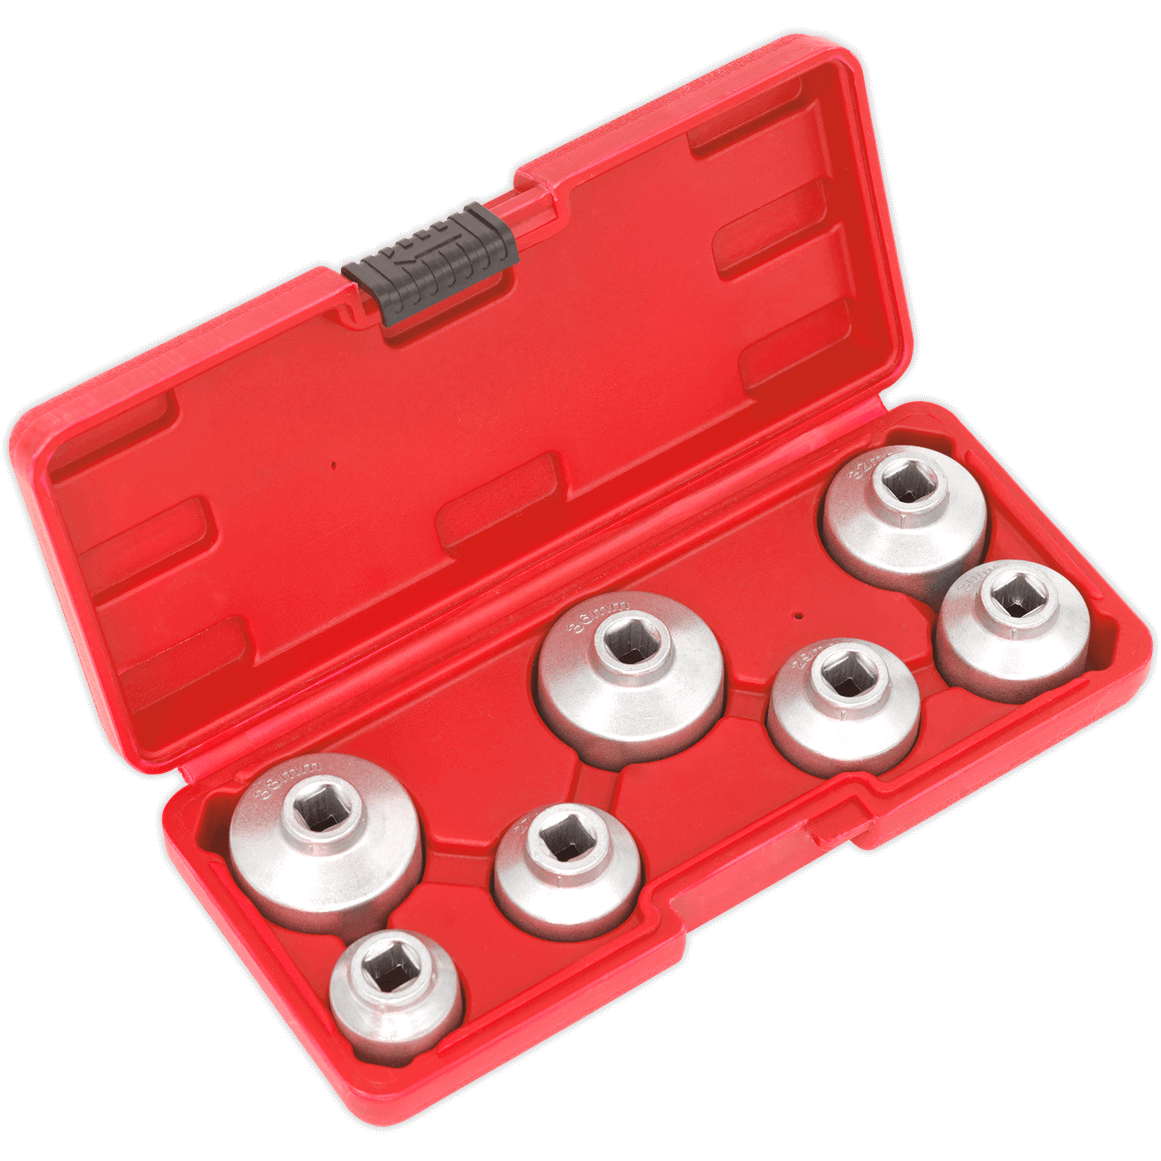 Sealey 7 Piece Oil Filter Cap Wrench Set